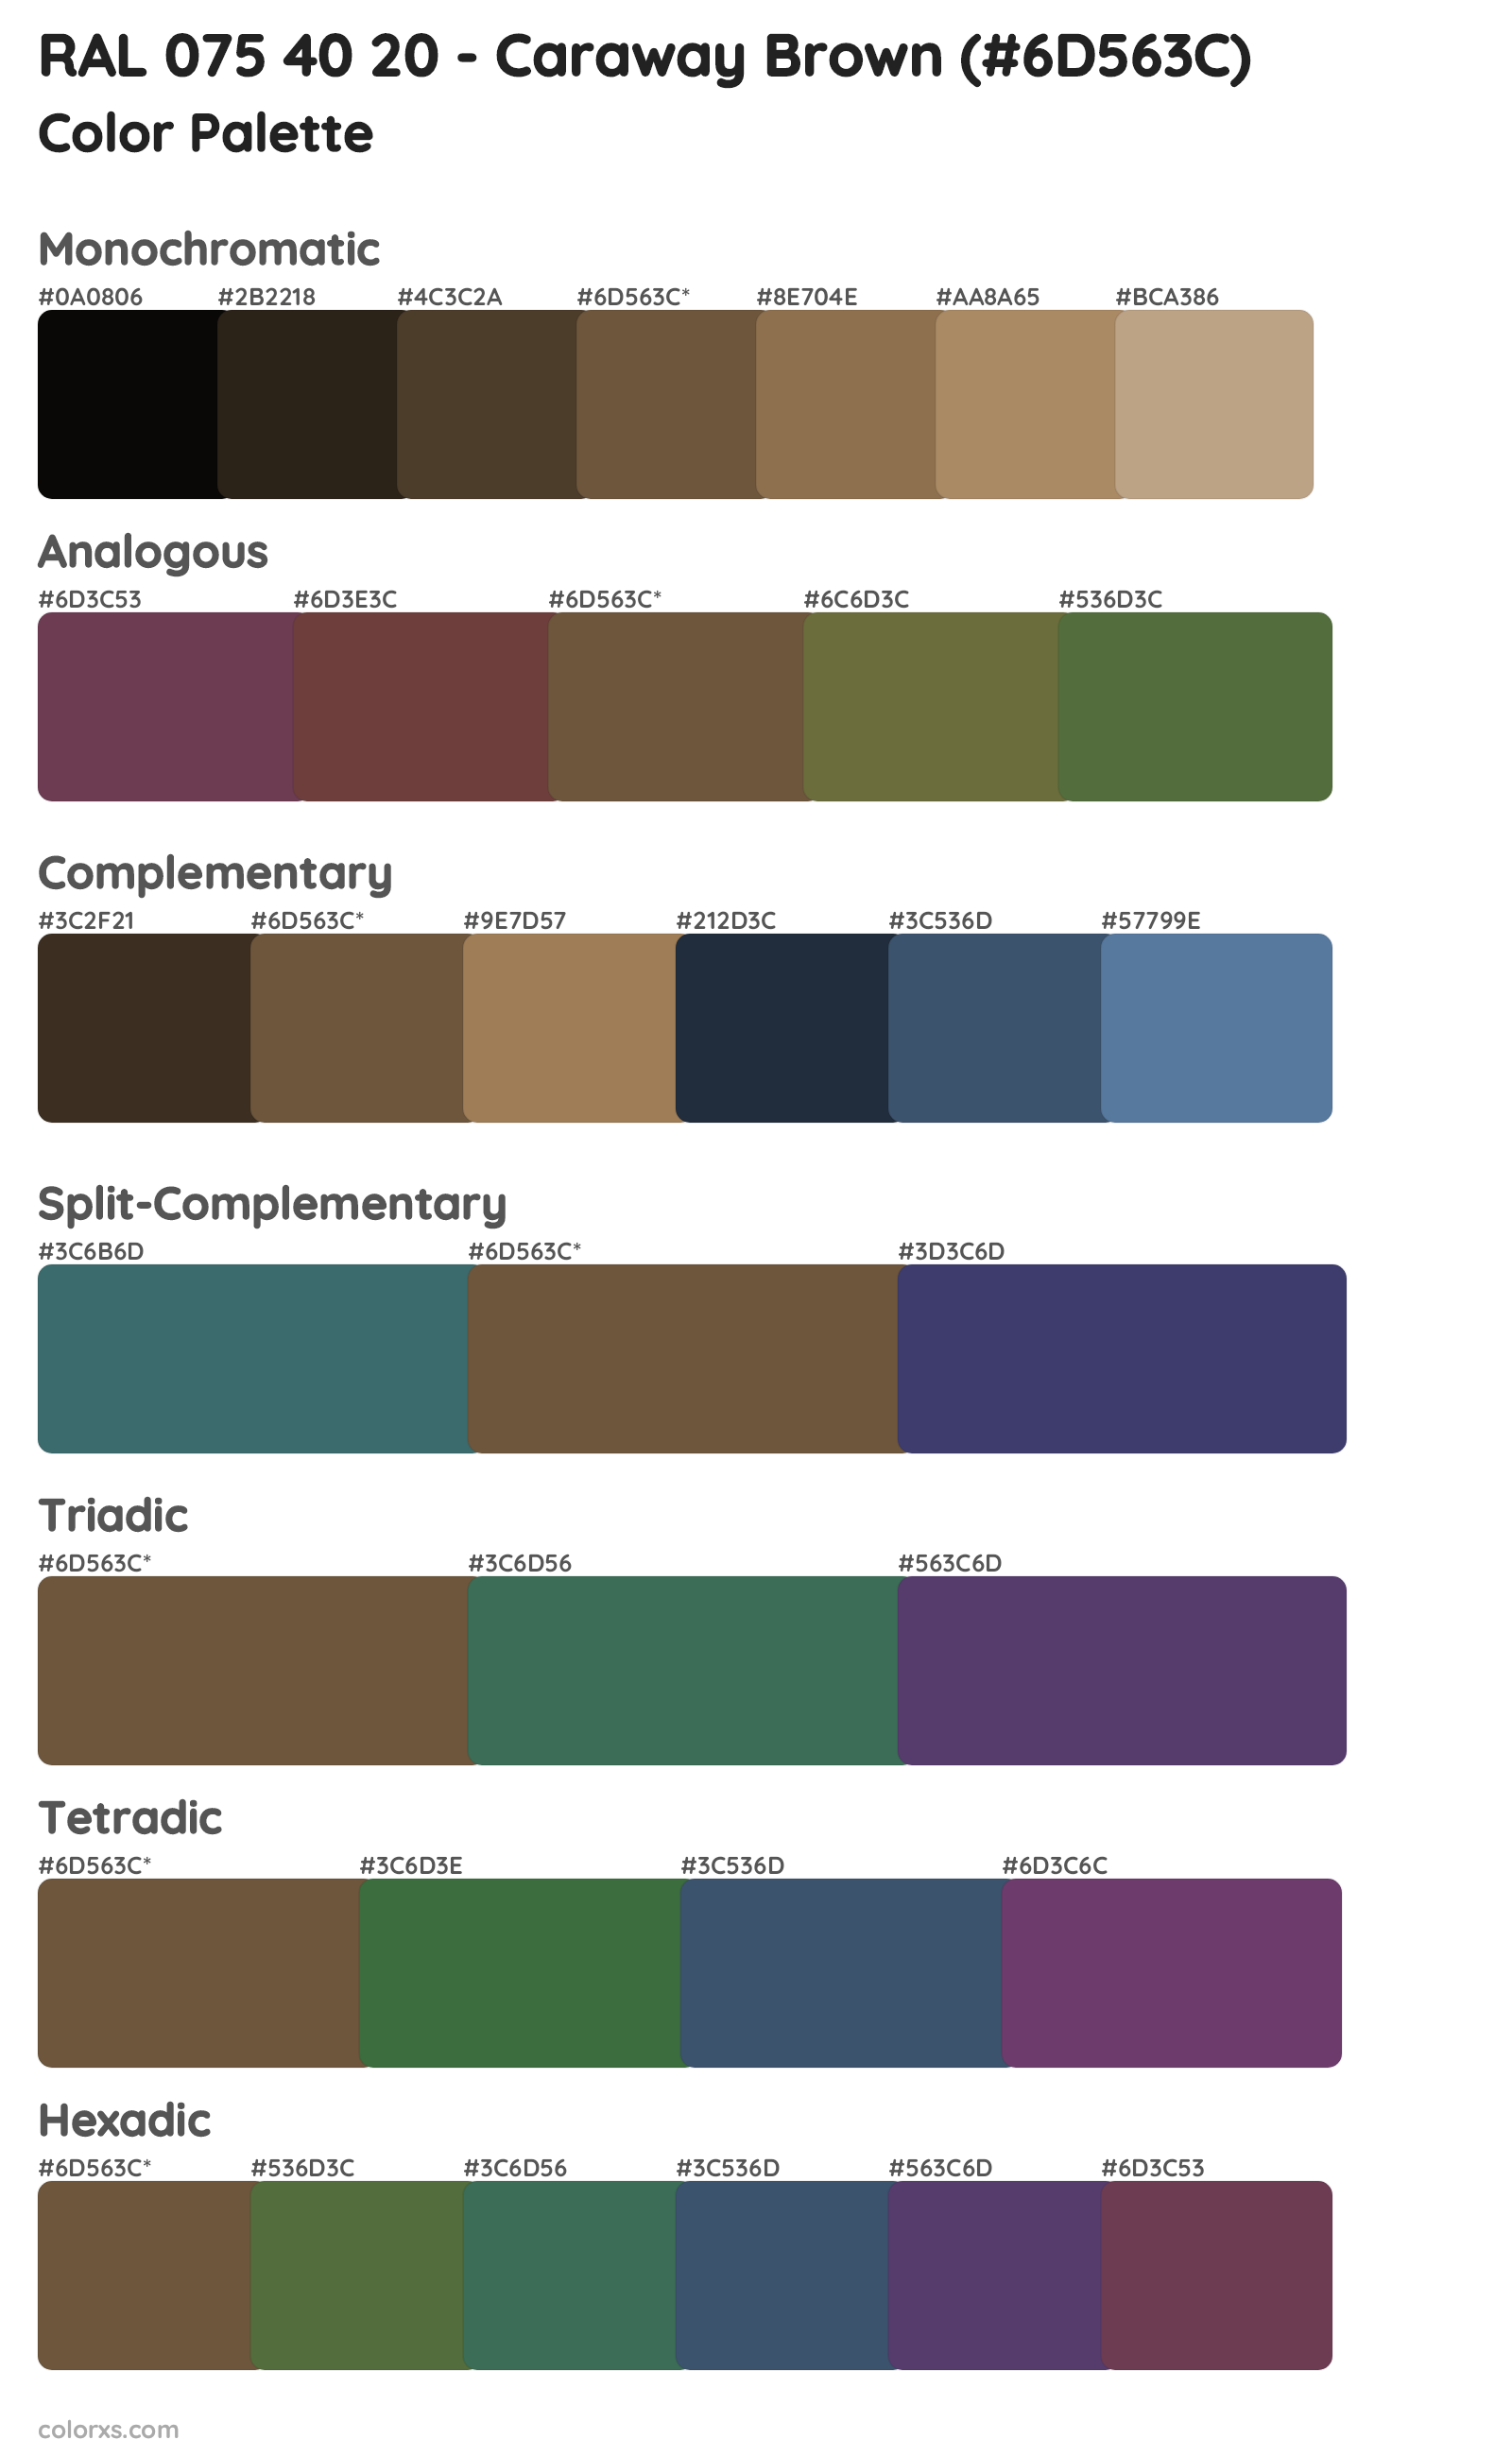 RAL 075 40 20 - Caraway Brown Color Scheme Palettes